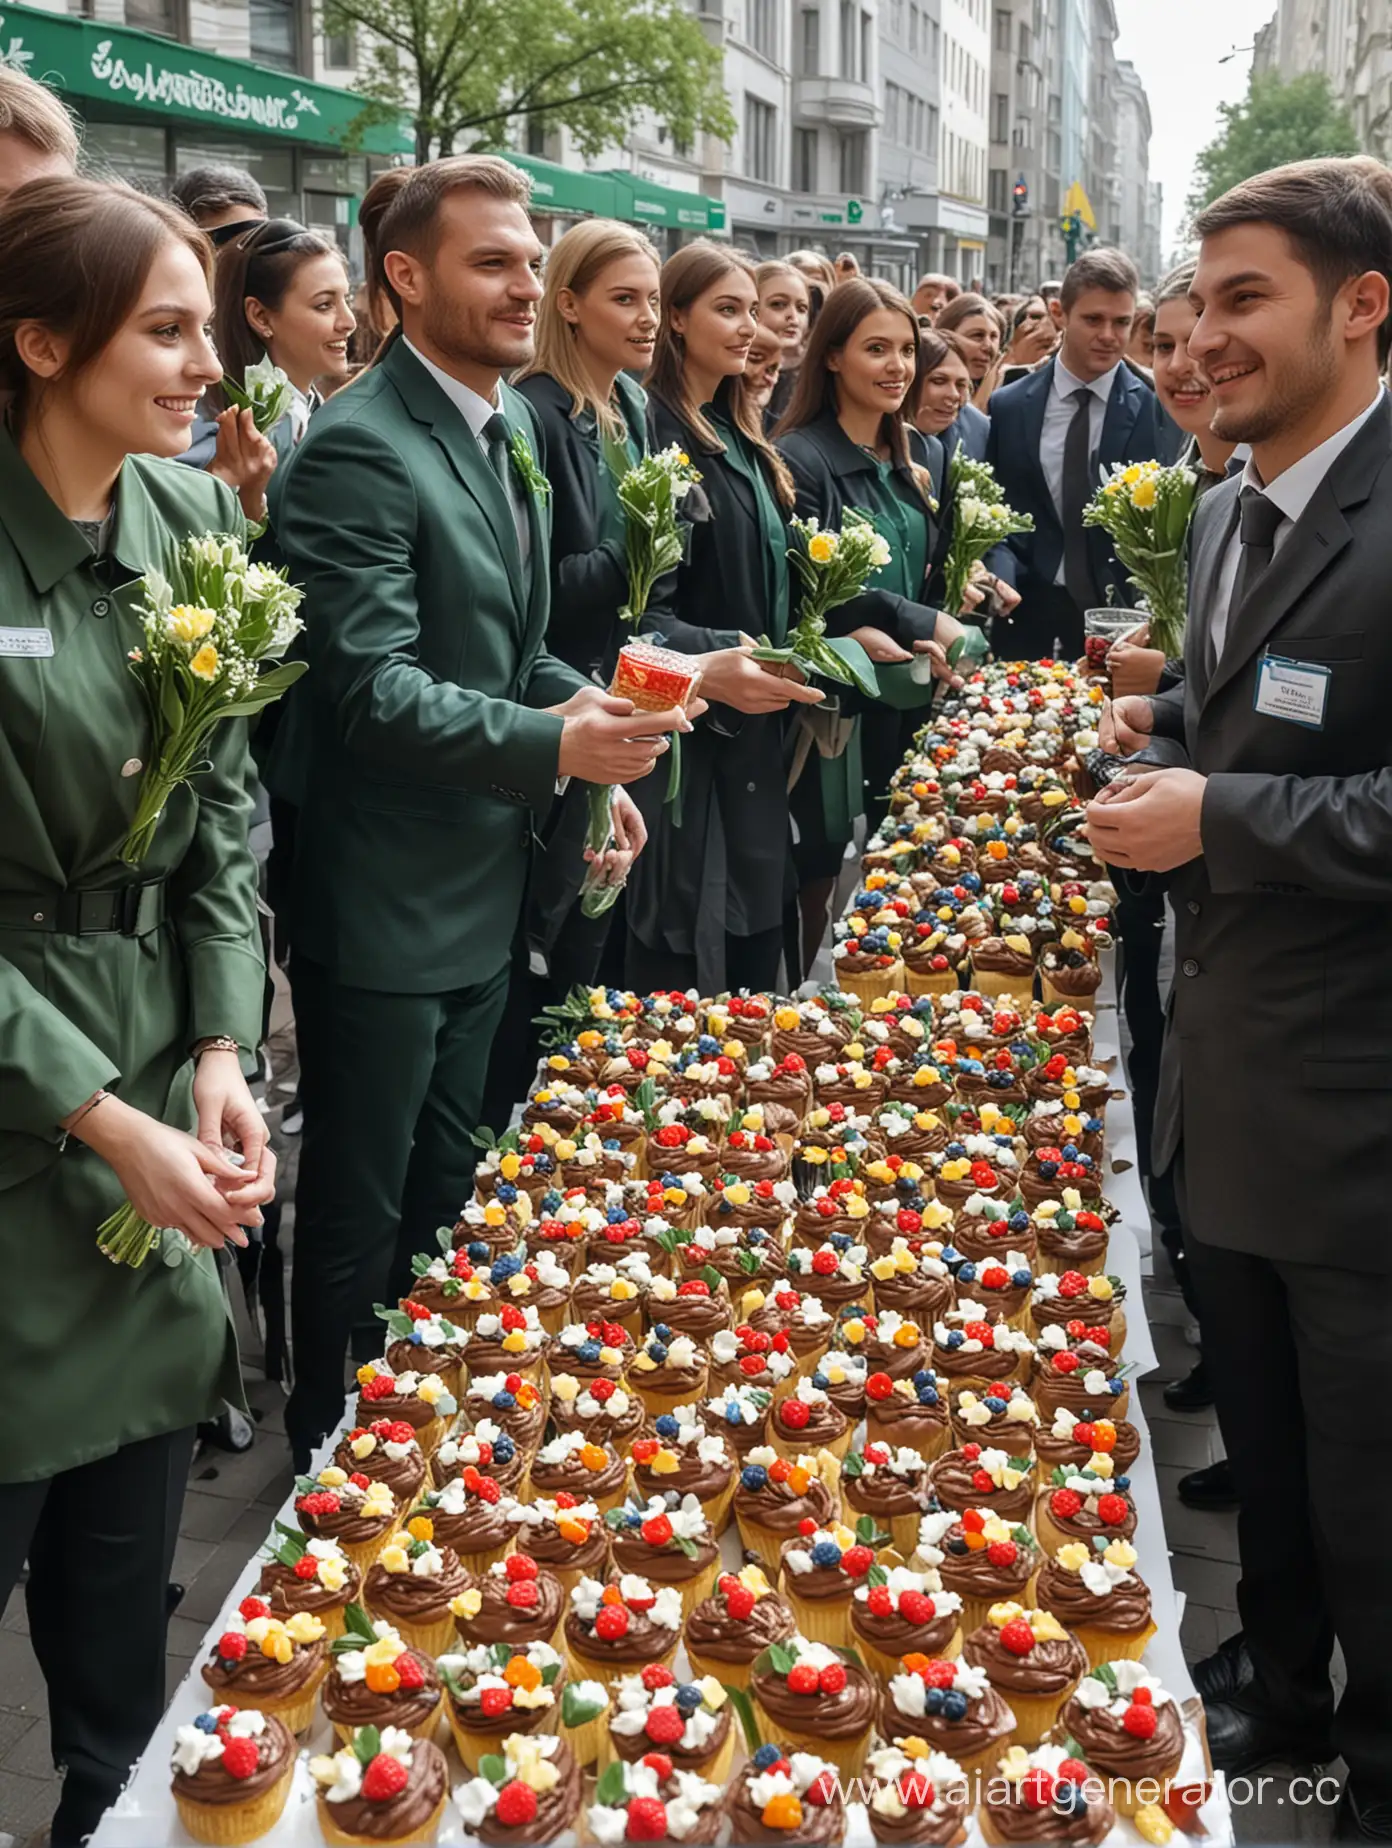 Sberbank-Employees-Protecting-Client-Interests-with-Flowers-and-Cakes